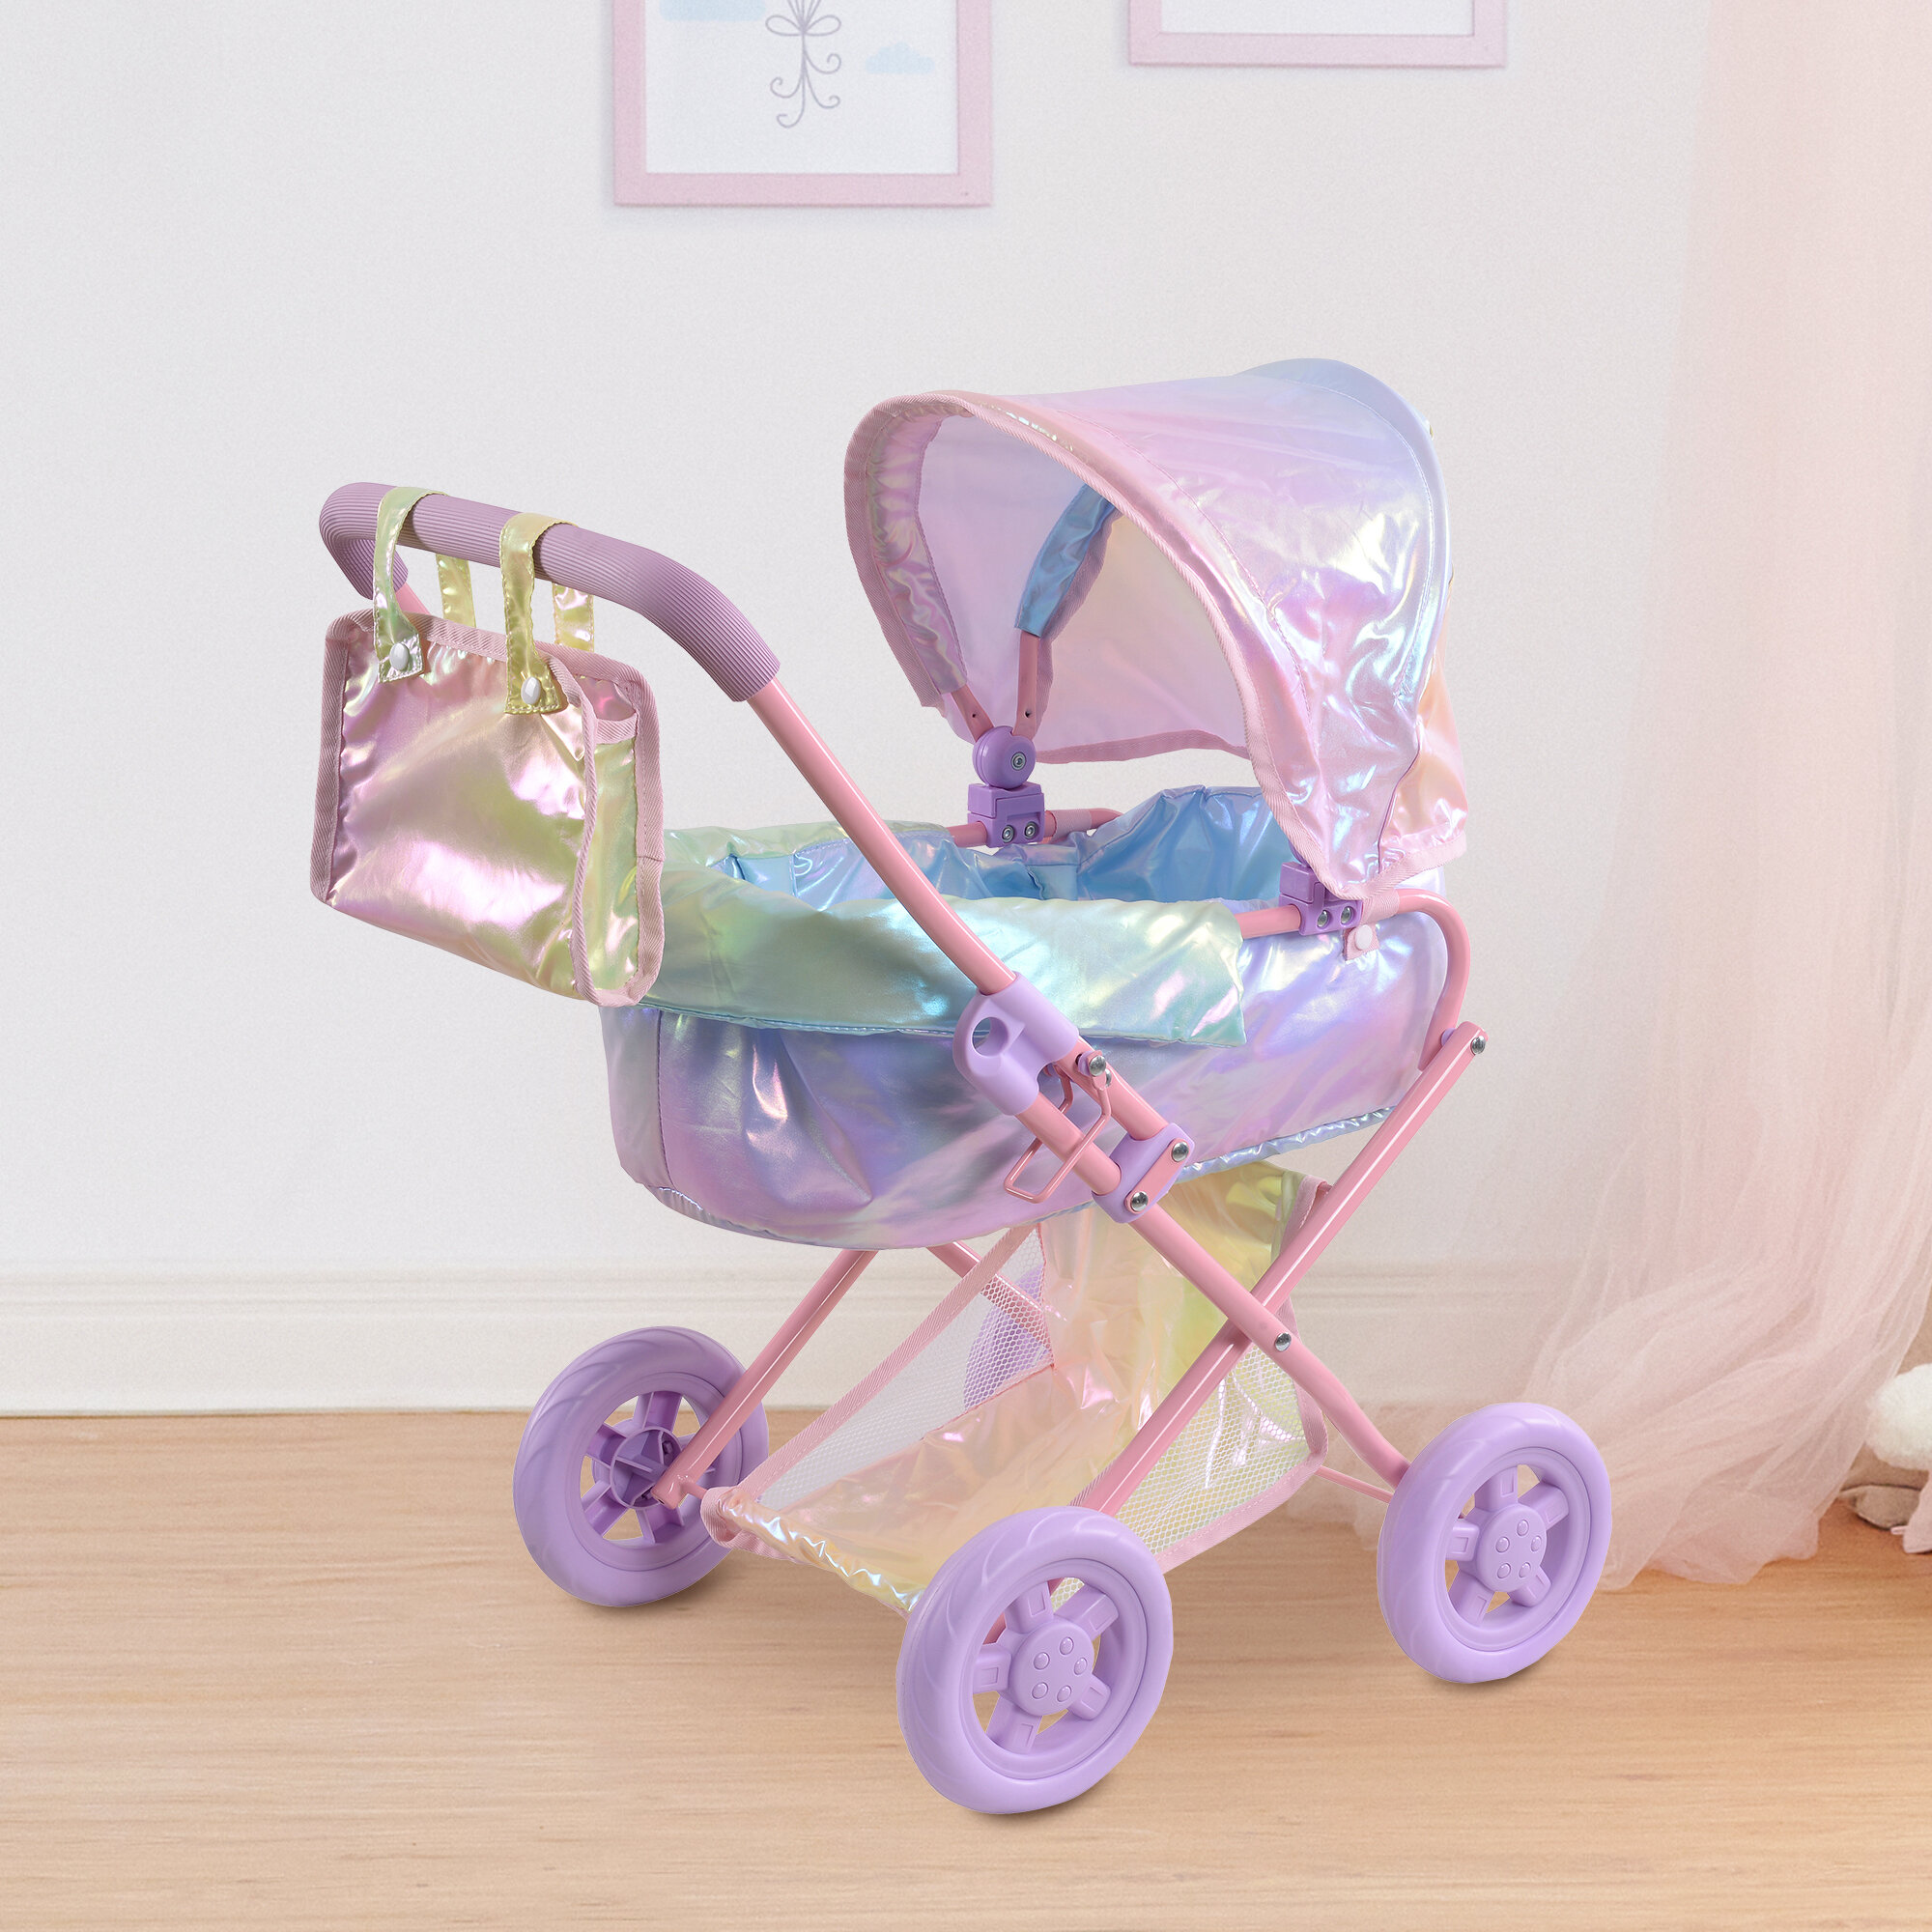 Olivia's Little World Magical Dreamland Baby Doll Deluxe Stroller & Reviews